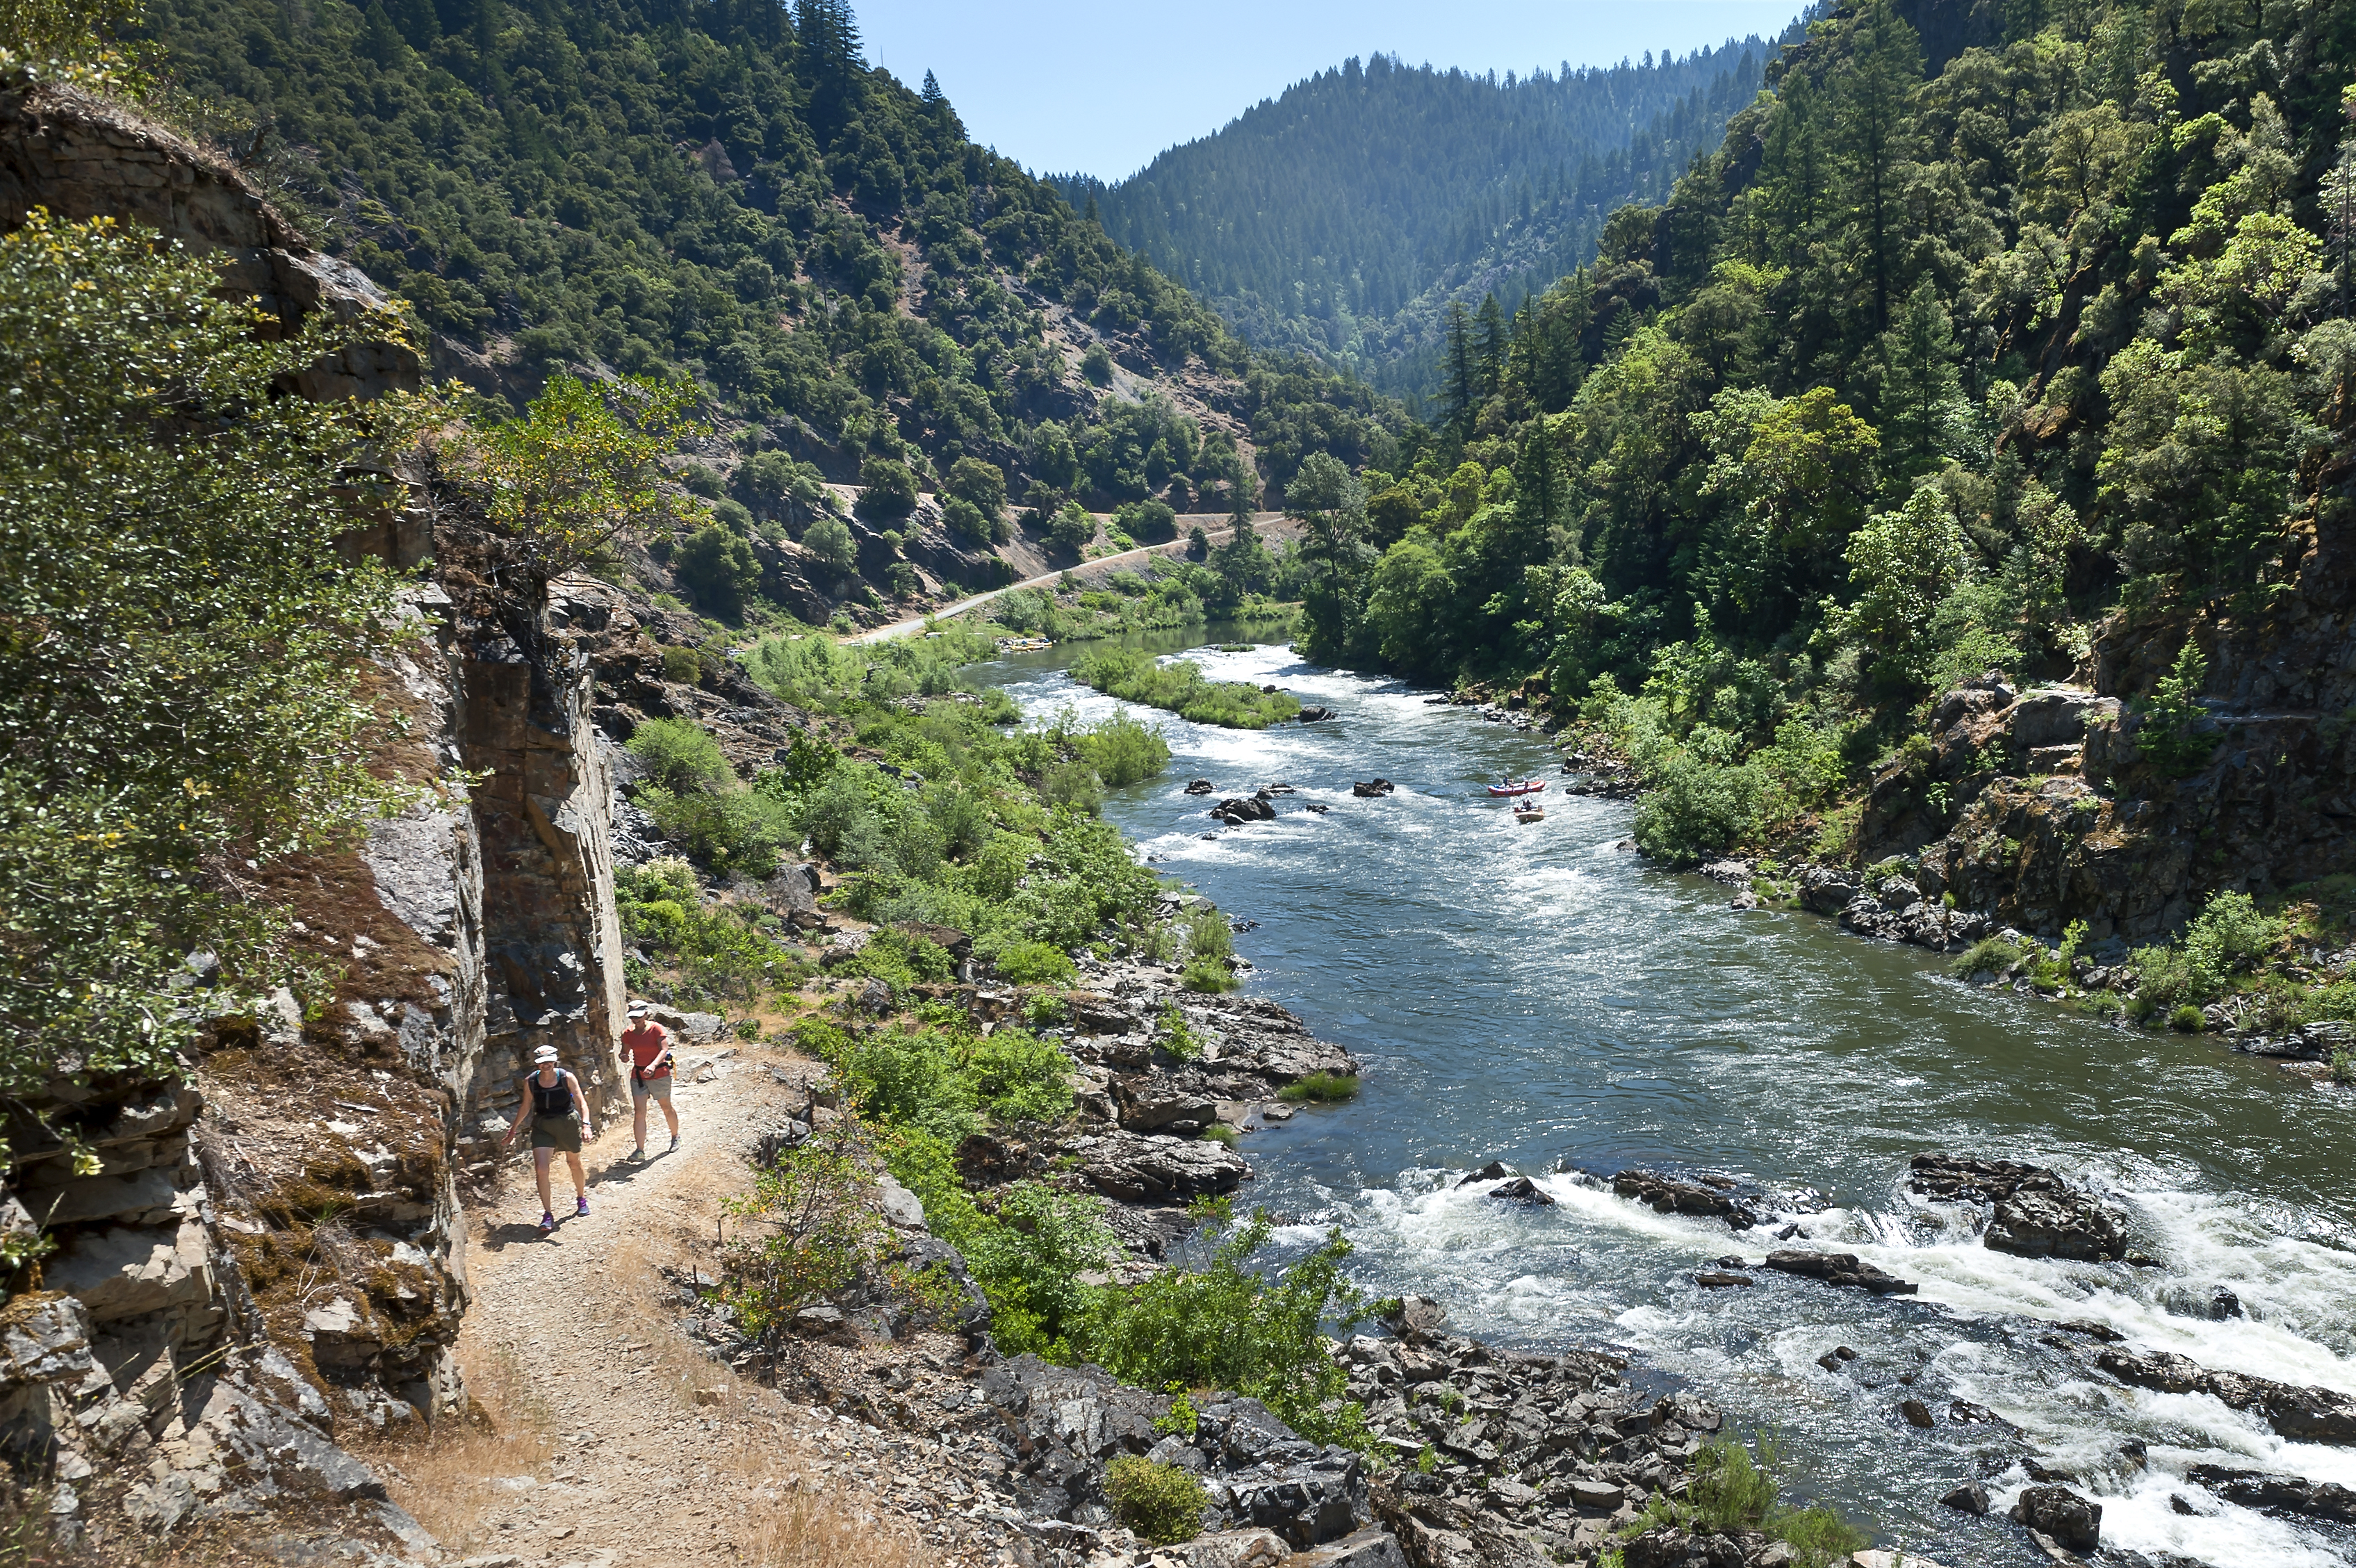 rogue river, trails, hiking, scenery